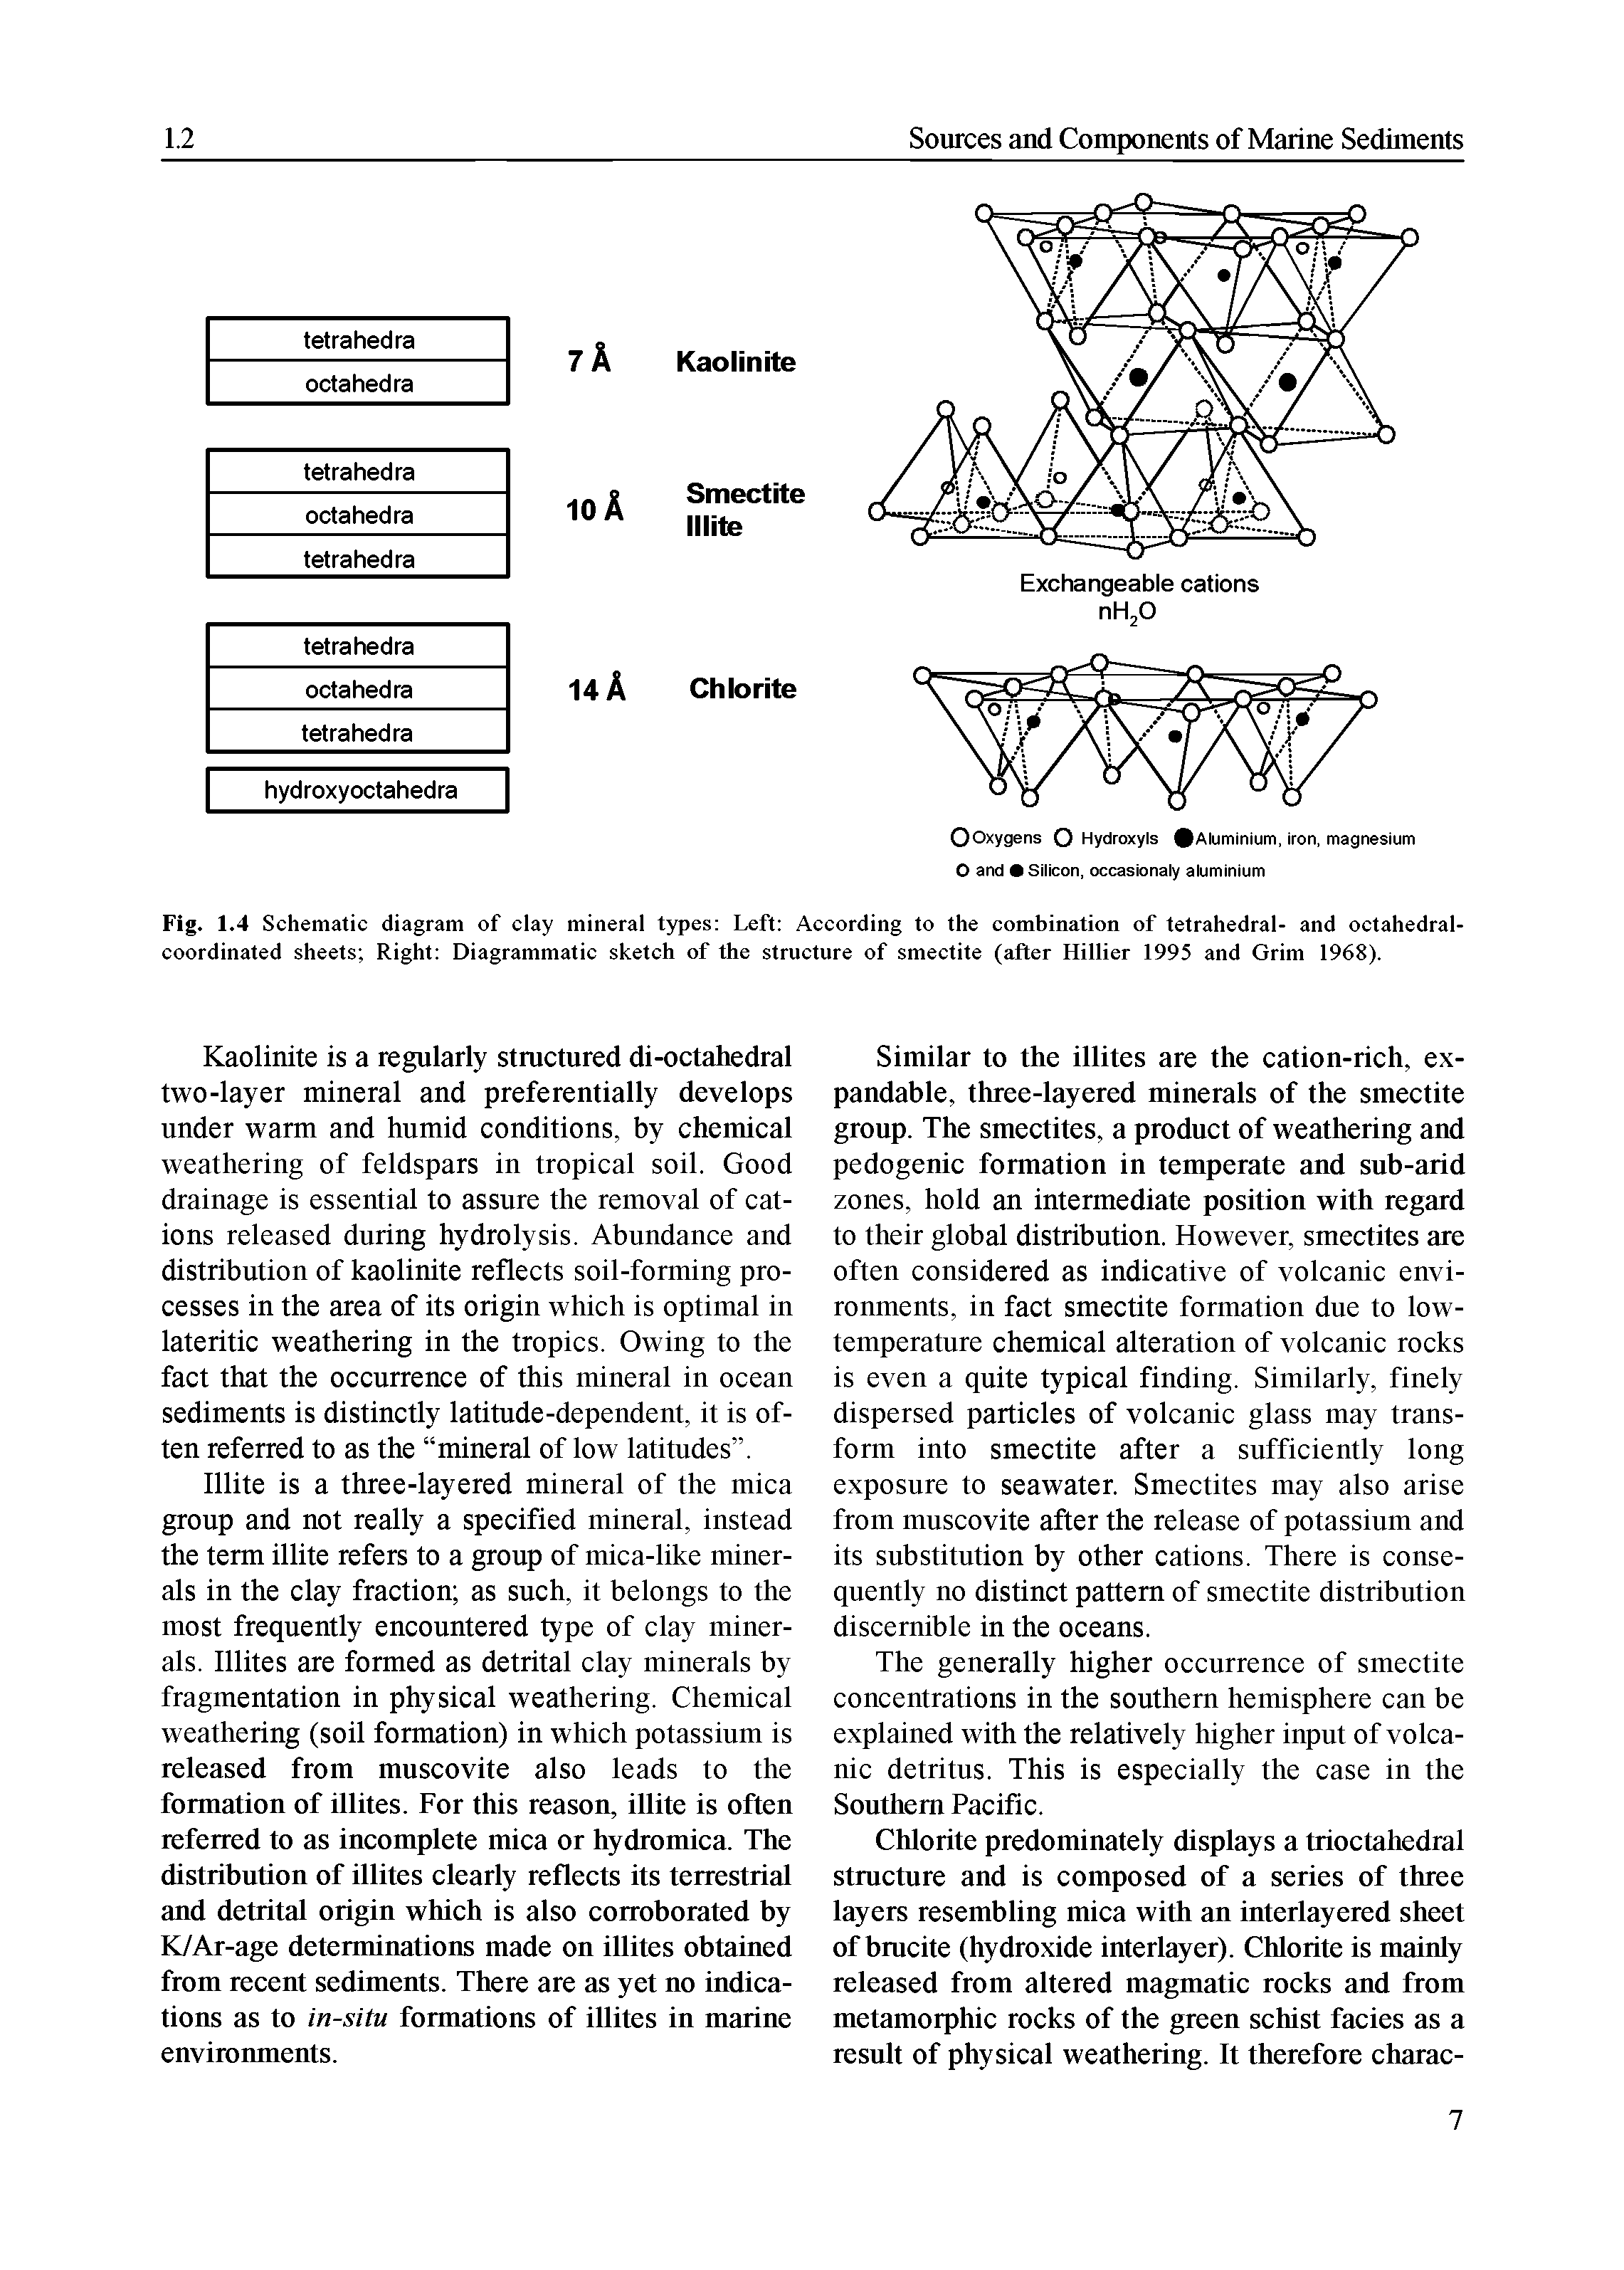 Fig. 1.4 Schematic diagram of clay mineral types Left According to the combination of tetrahedral- and octahedral-coordinated sheets Right Diagrammatic sketch of the structure of smectite (after Hillier 1995 and Grim 1968).